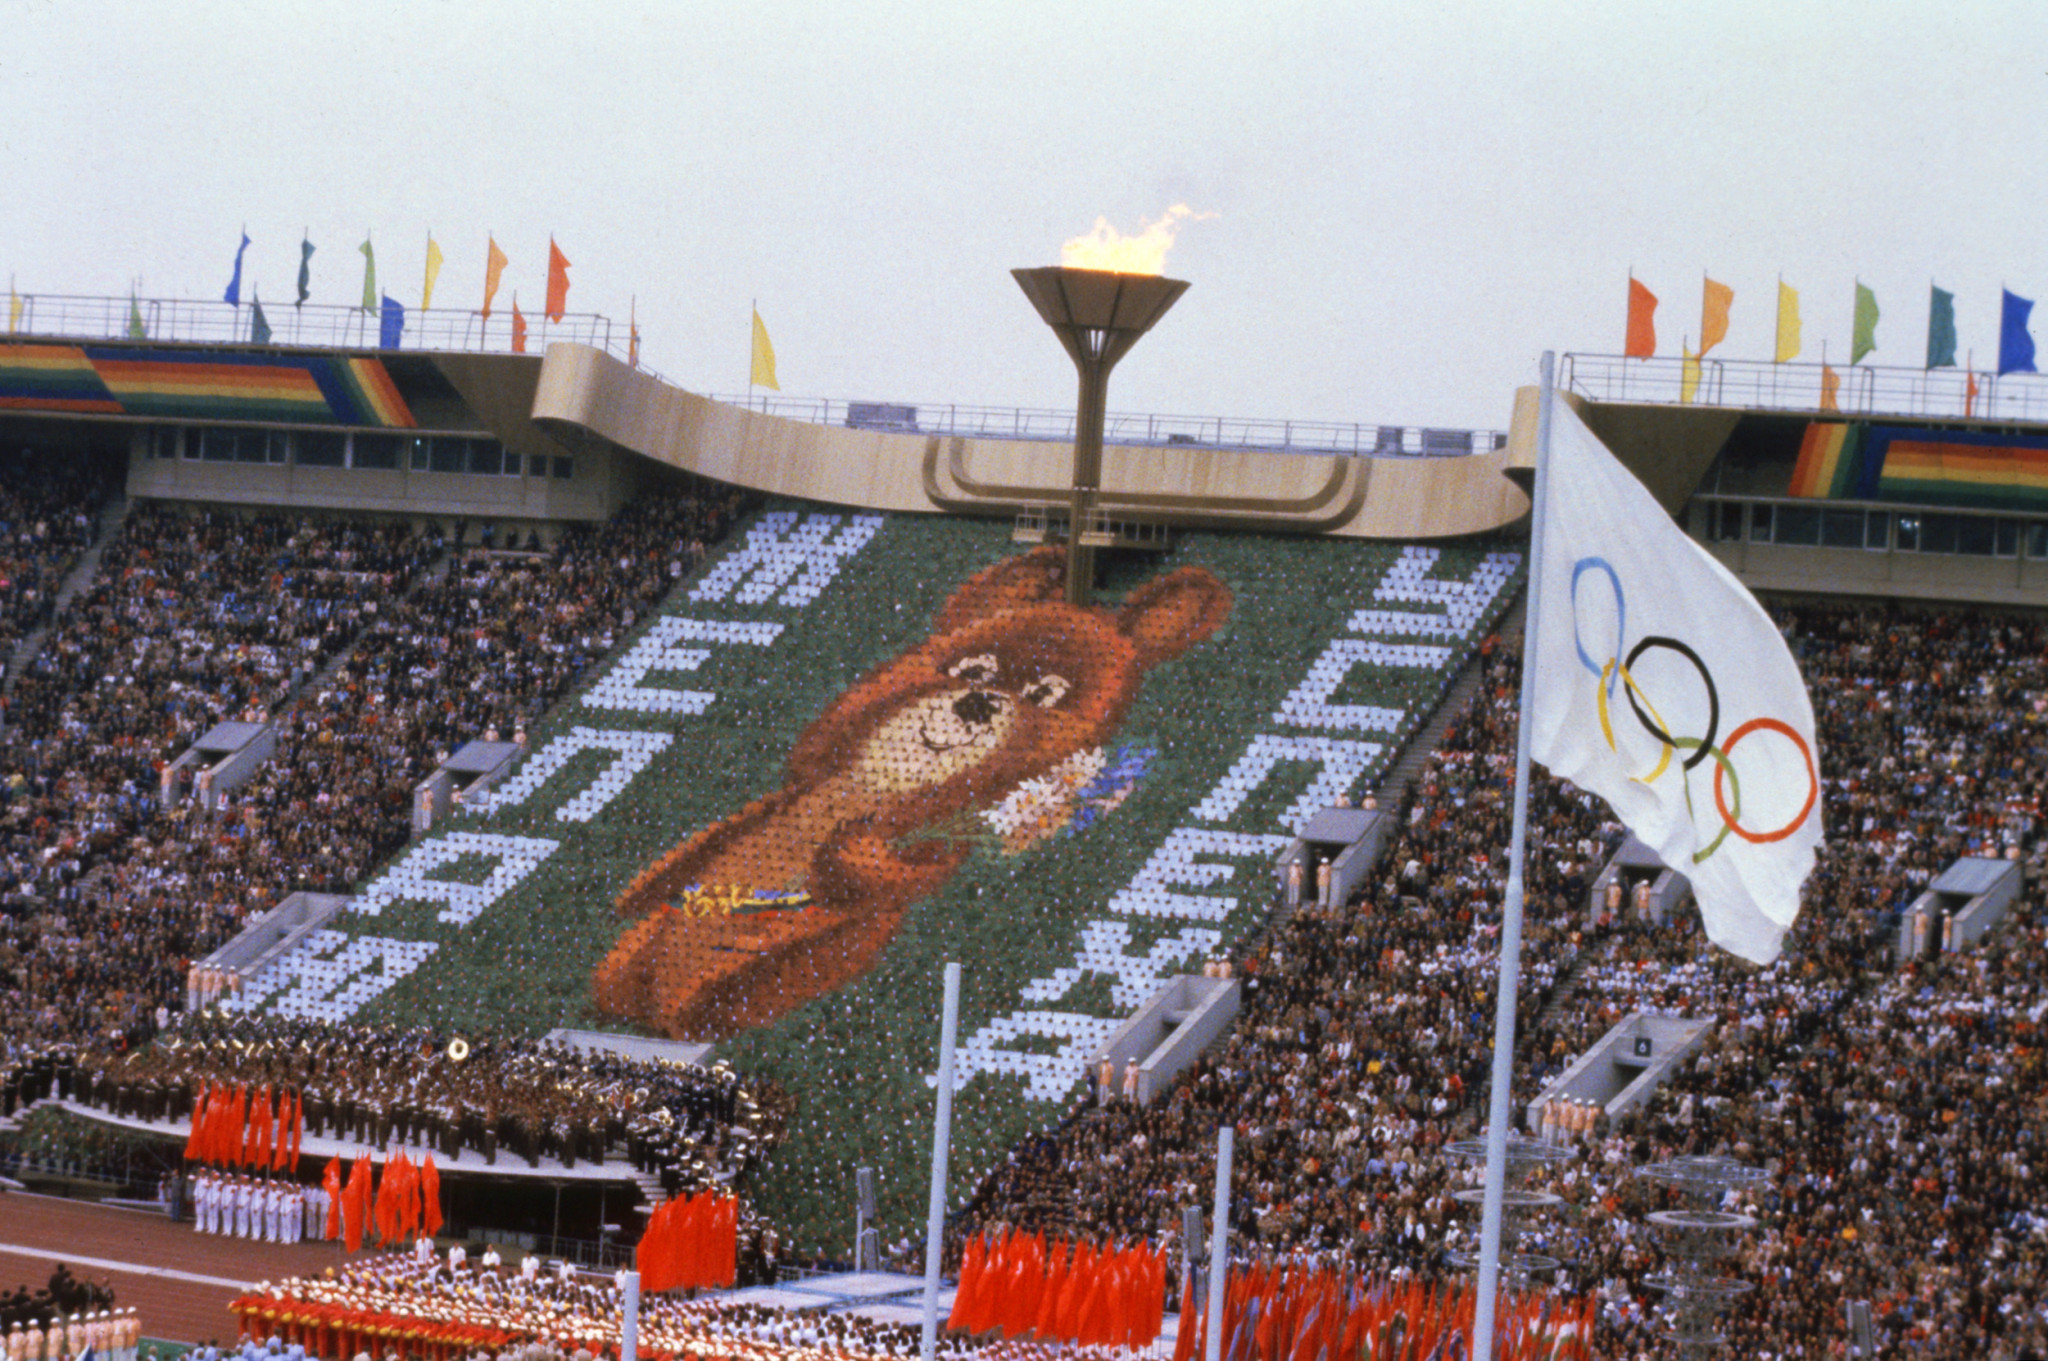 Moscow staged magnificent Ceremonies to open the 1980 Olympics but the Games were damaged by the Soviet invasion of Afghanistan ©Getty Images